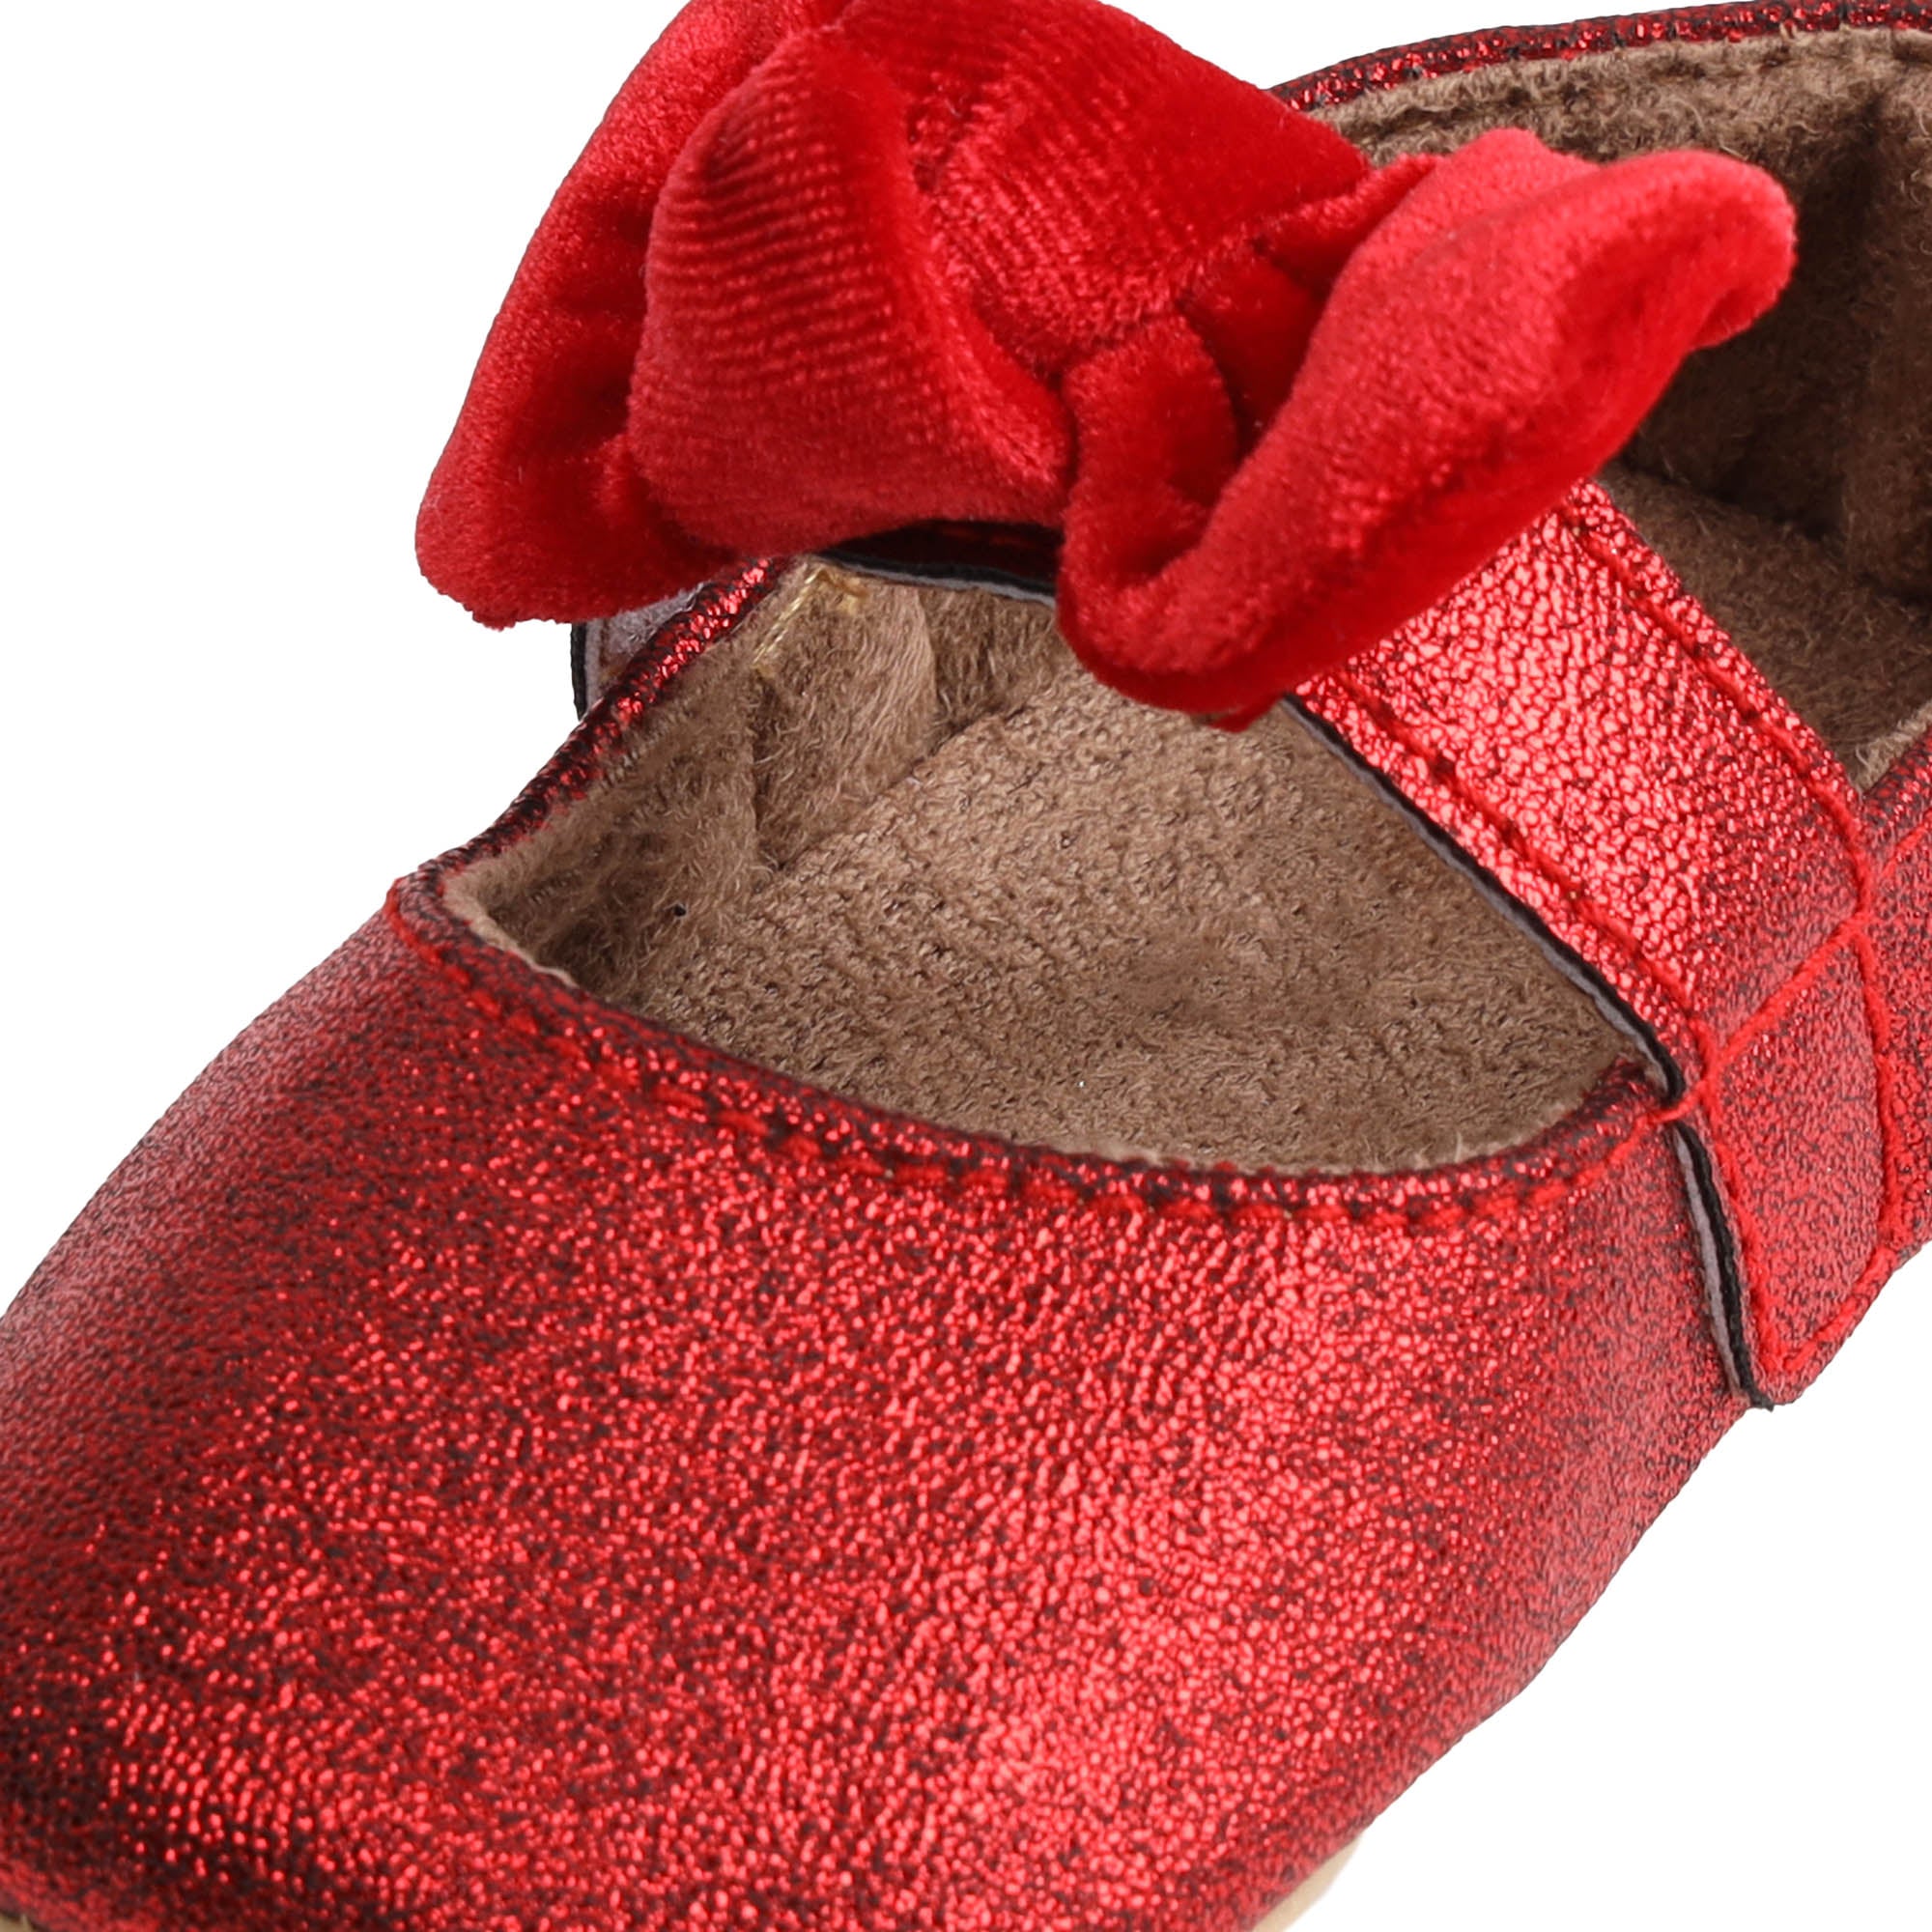 Kicks & Crawl- Cherry Red Party Shoes